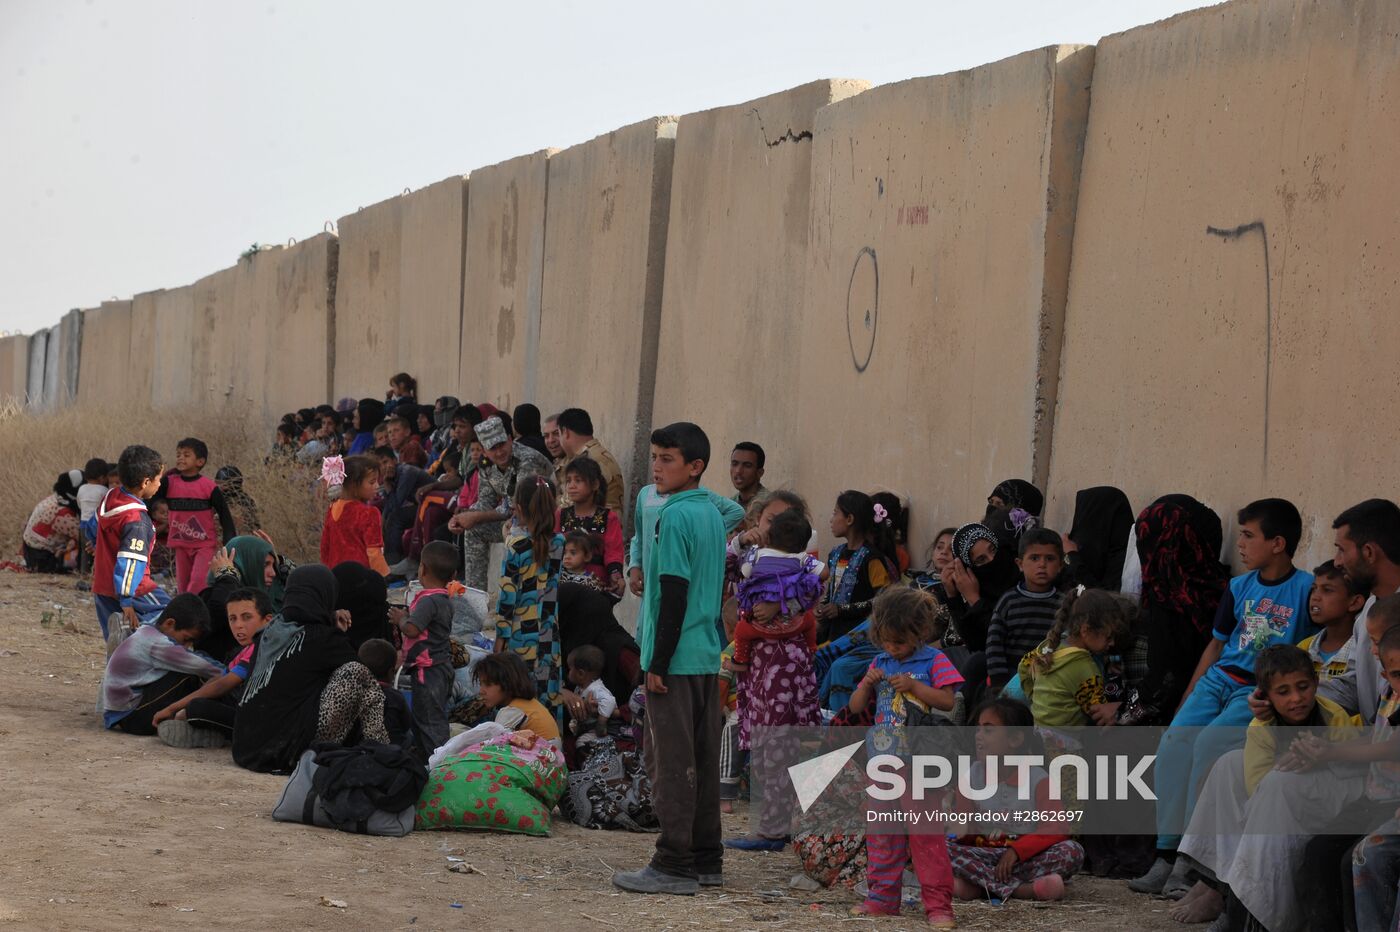 Refugees from ISIL-occupied lands come to Kirkuk in Iraq